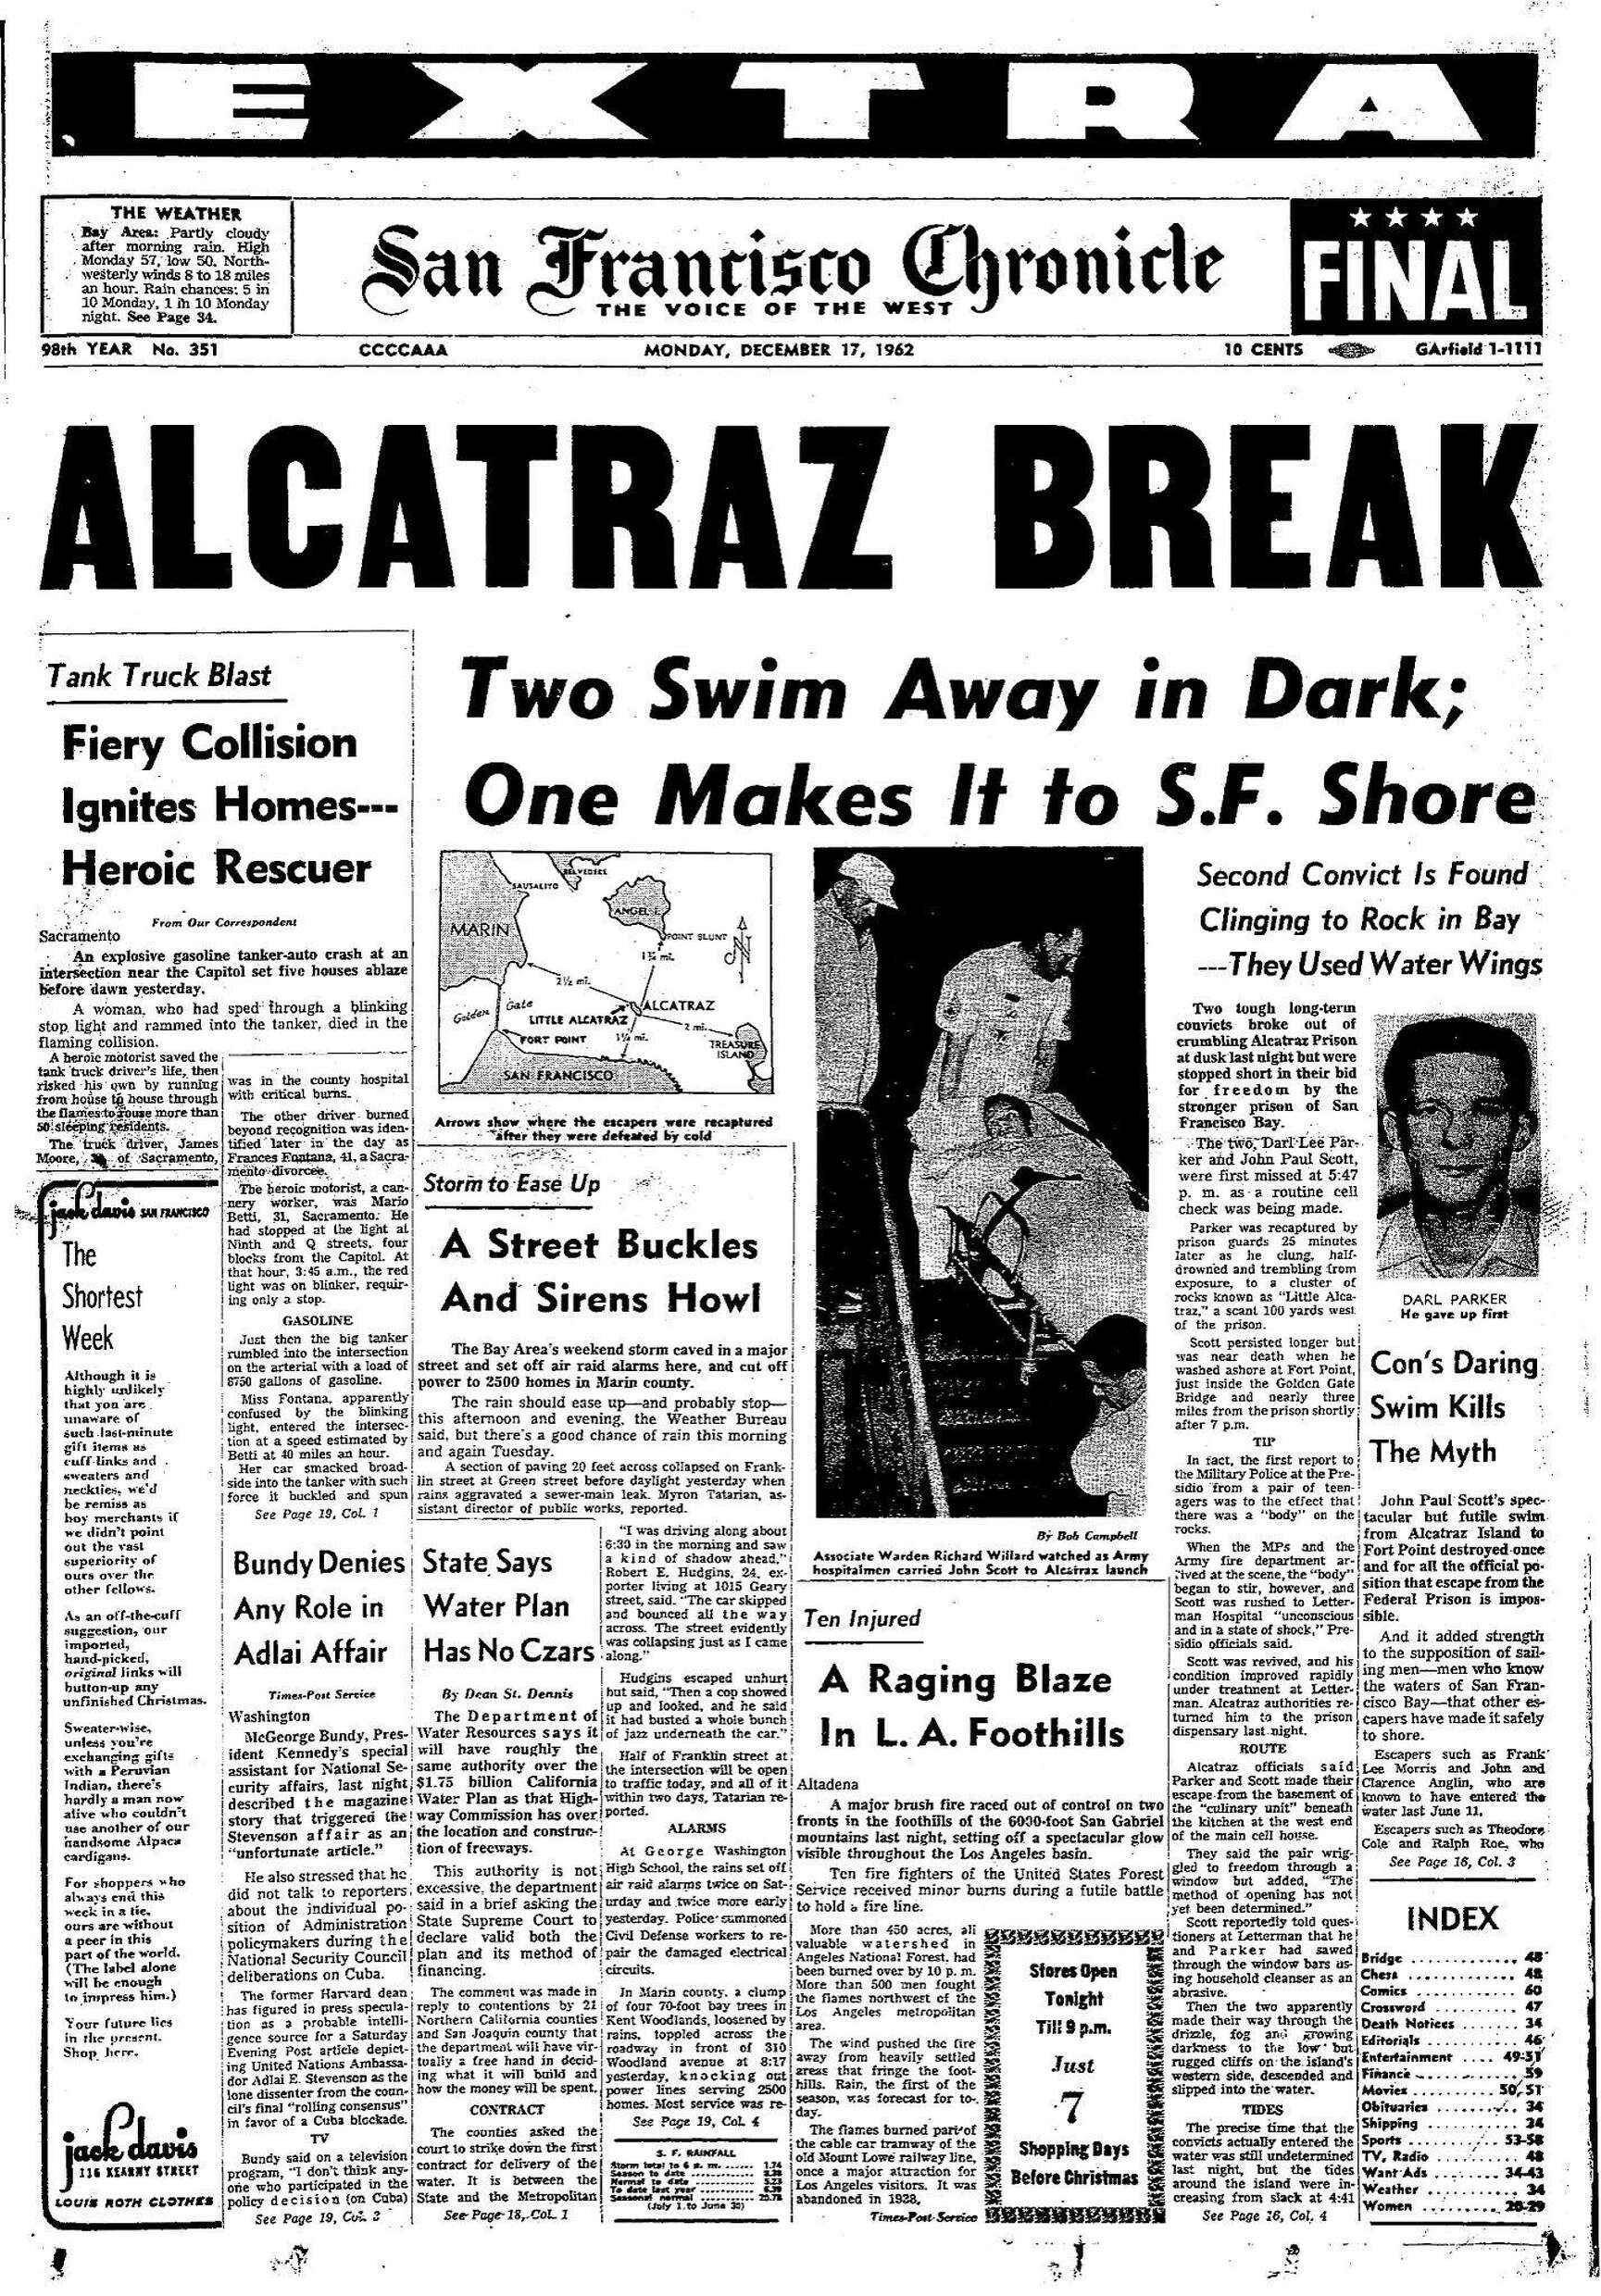 Video 'Escape From Alcatraz' Mystery Revisited - ABC News